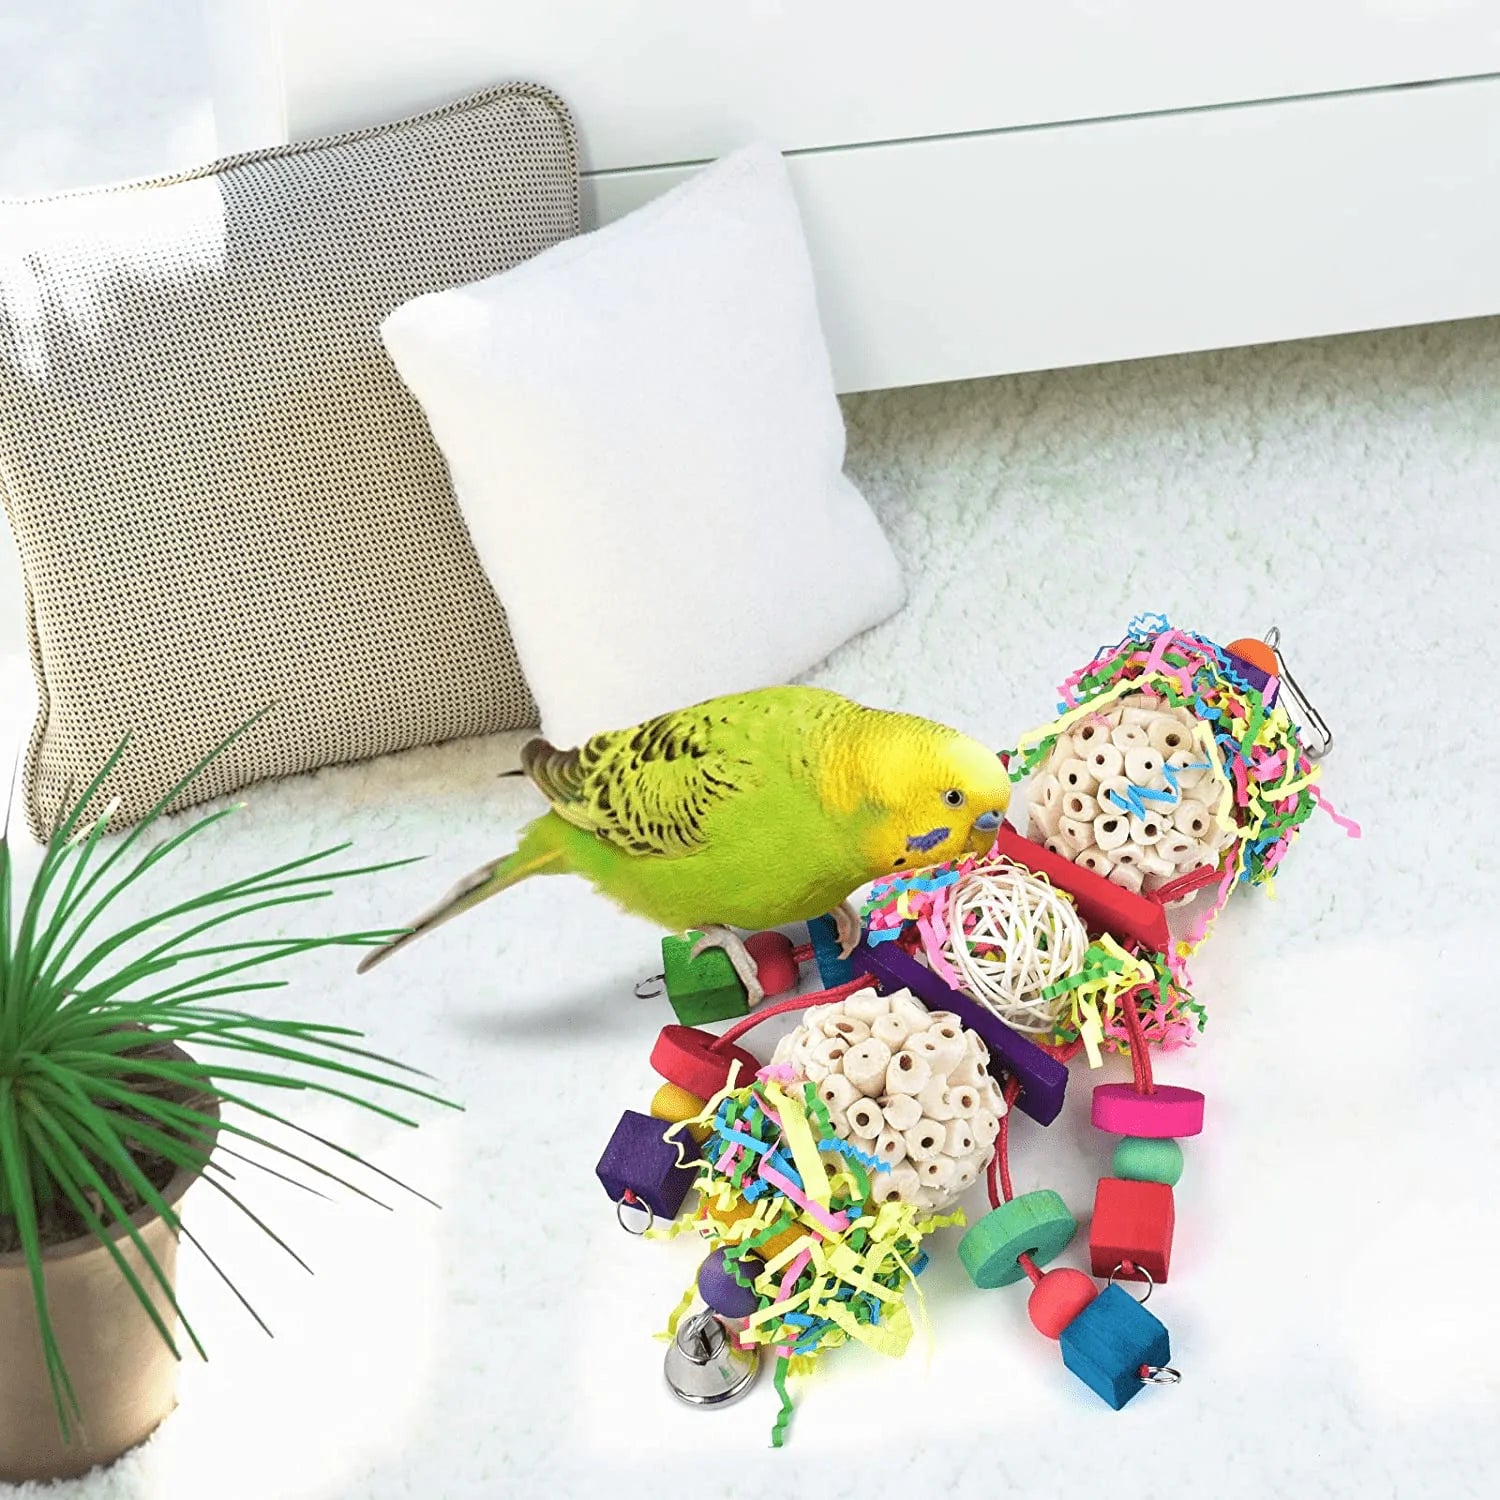 Bissap Conure Toys, Bird Parrot Foraging Shredder Hanging Toys Sola Balls Sepak Takraw with Bell for Small Parrots Parakeets Conures Cockatiels Love Birds Cage Toy